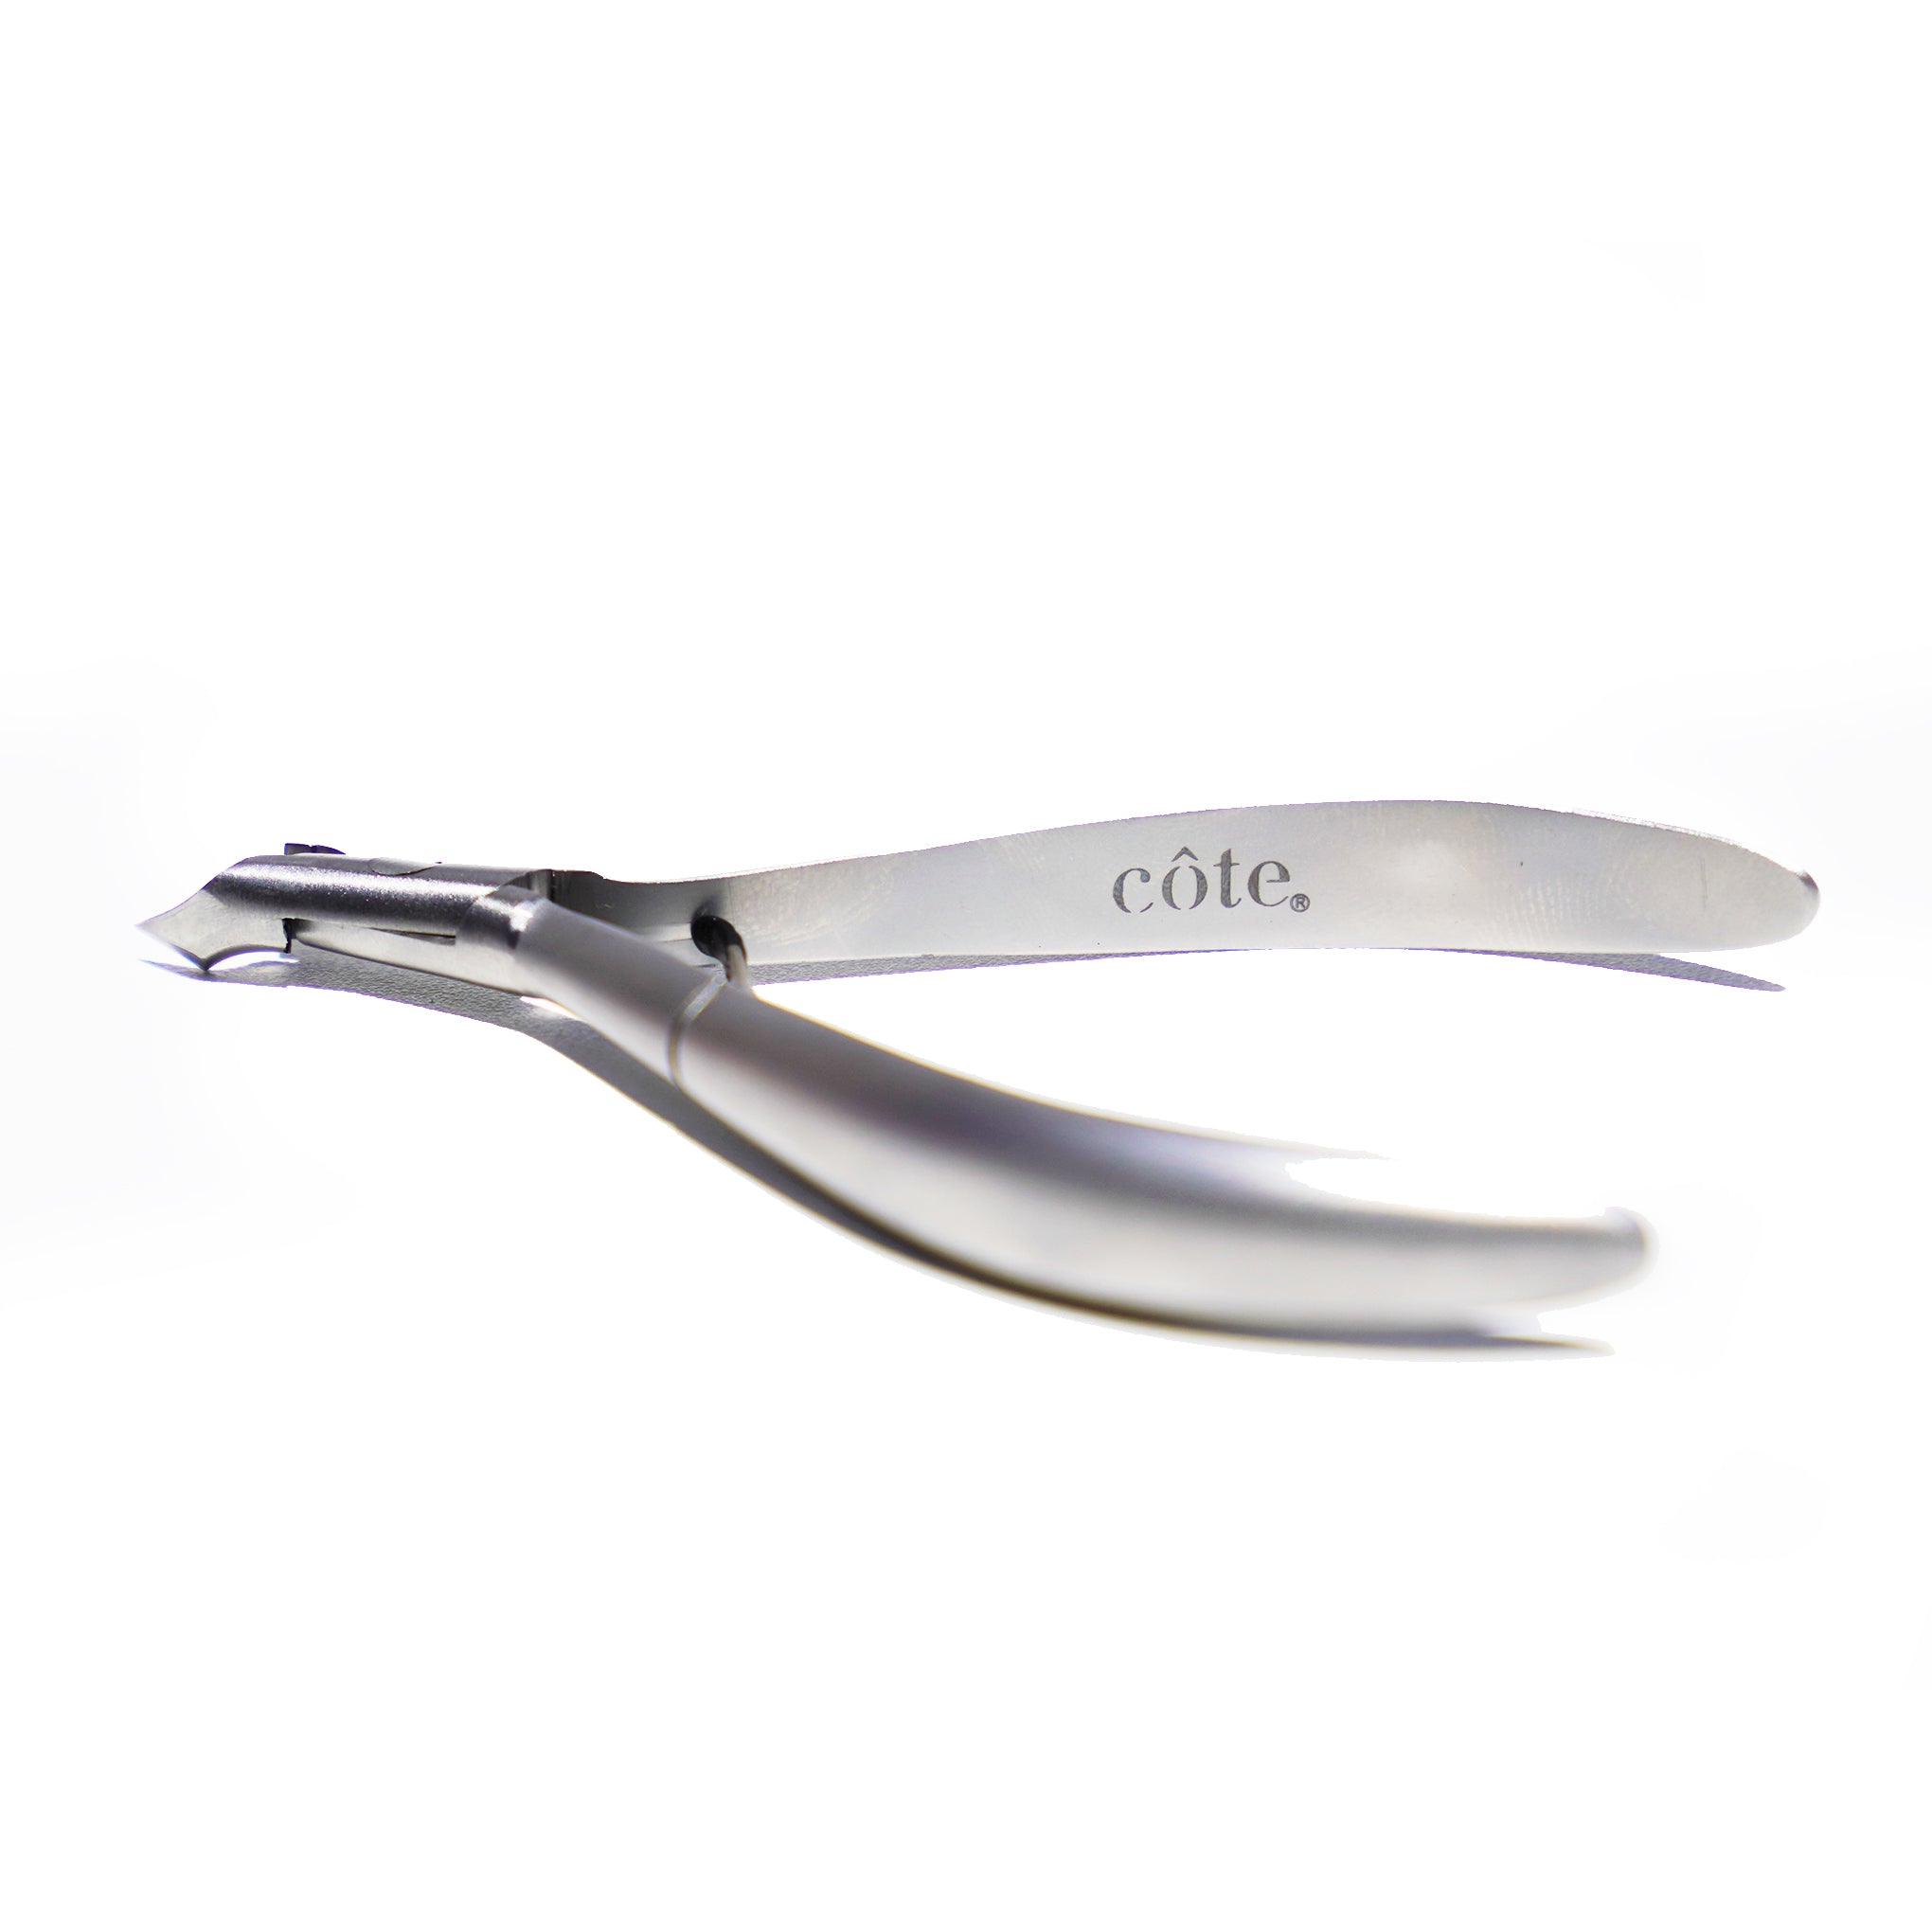 CUTICLE NIPPERS 5mm @ NAIL SUPPLY STORE IN TALLINN. HIGH QUALITY